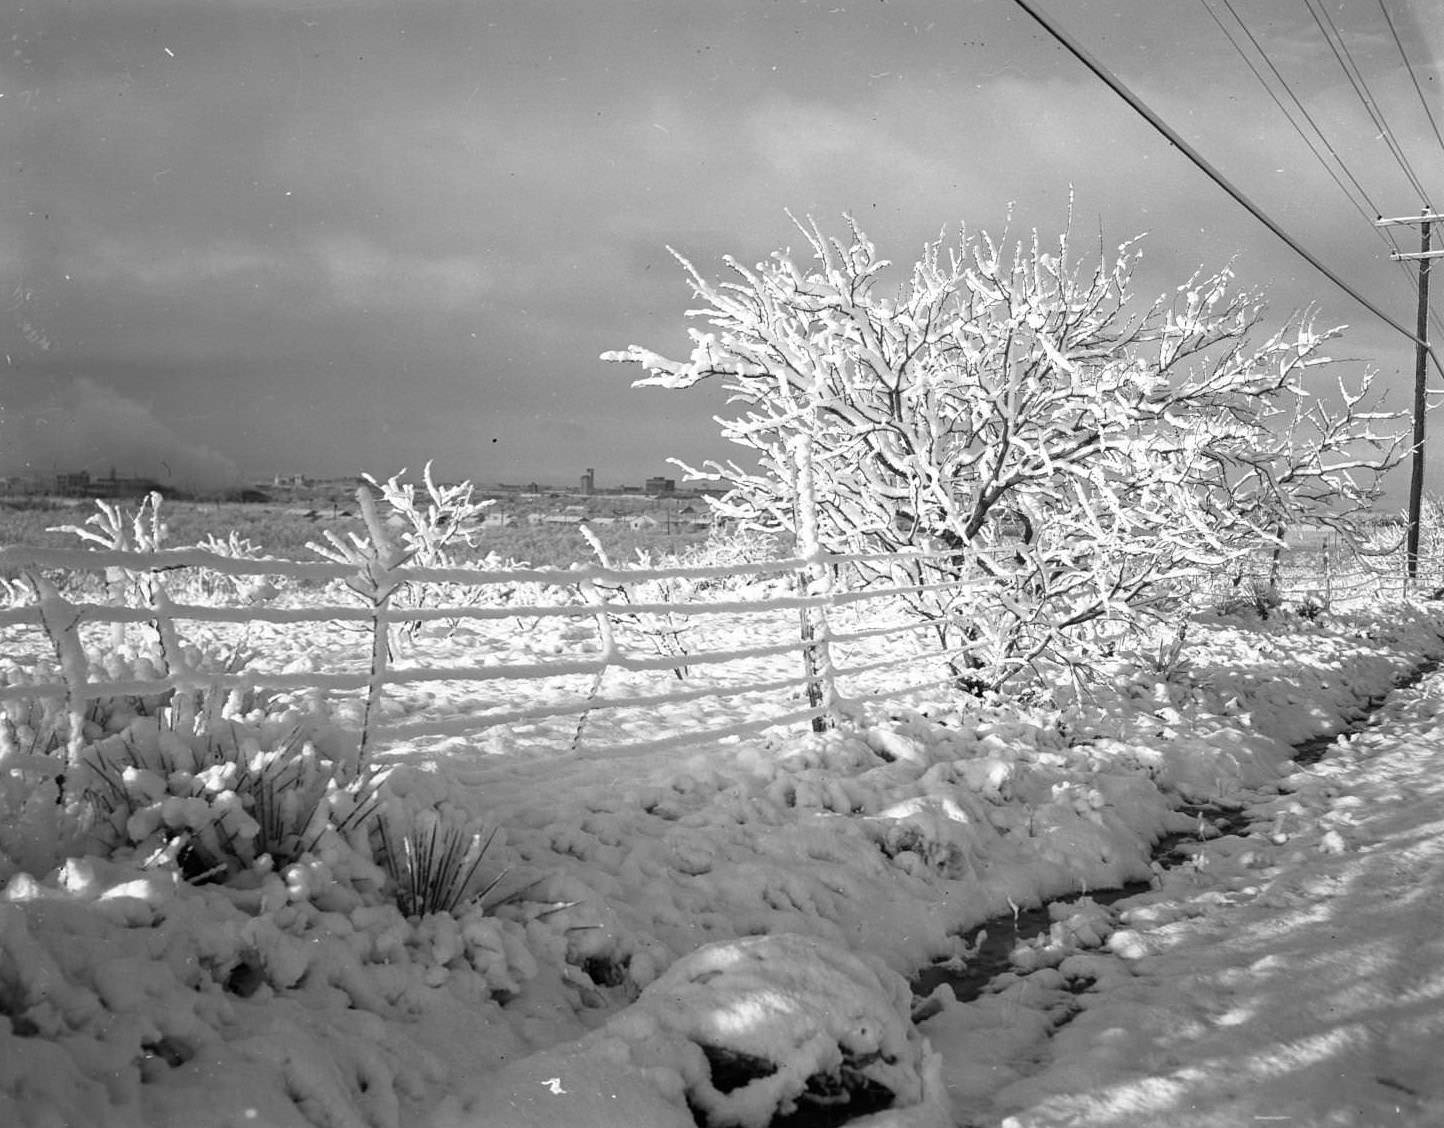 Snow covering a barbed wire fence, a tree, and several plants, 1958